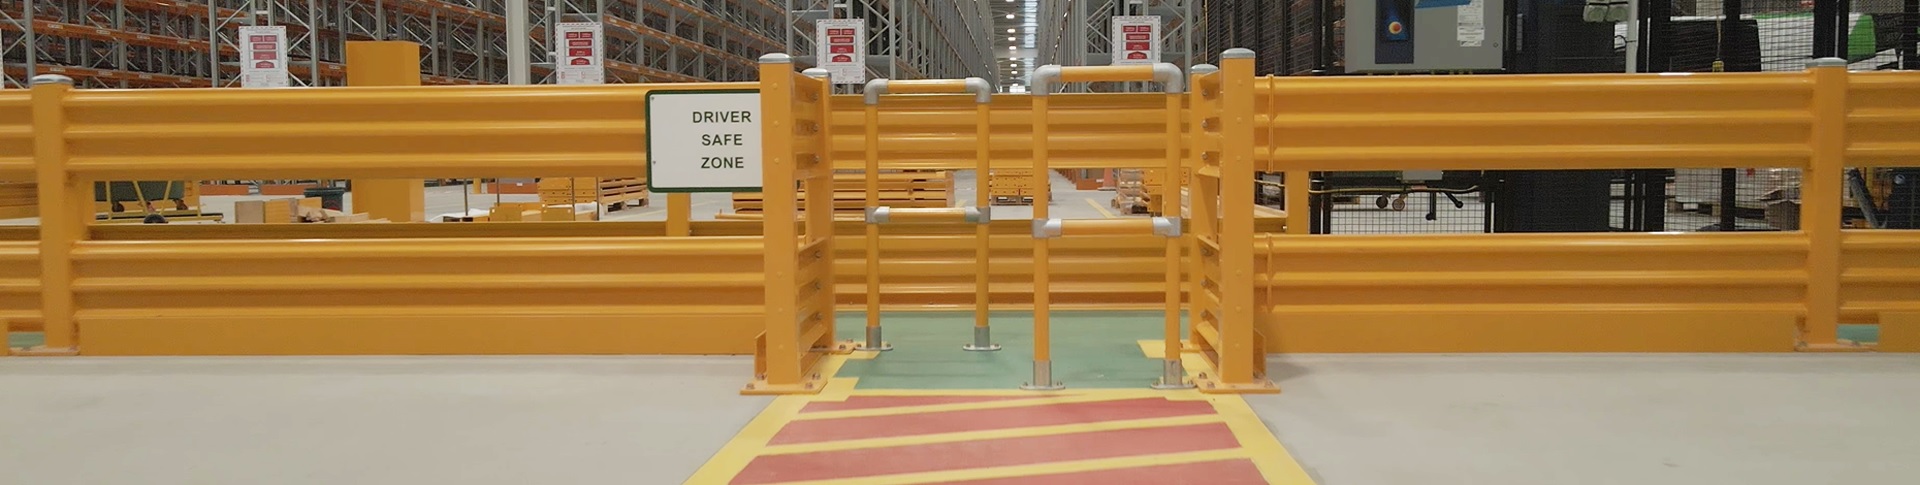 Woolworths Distribution Centre Case Study | Safety Barriers